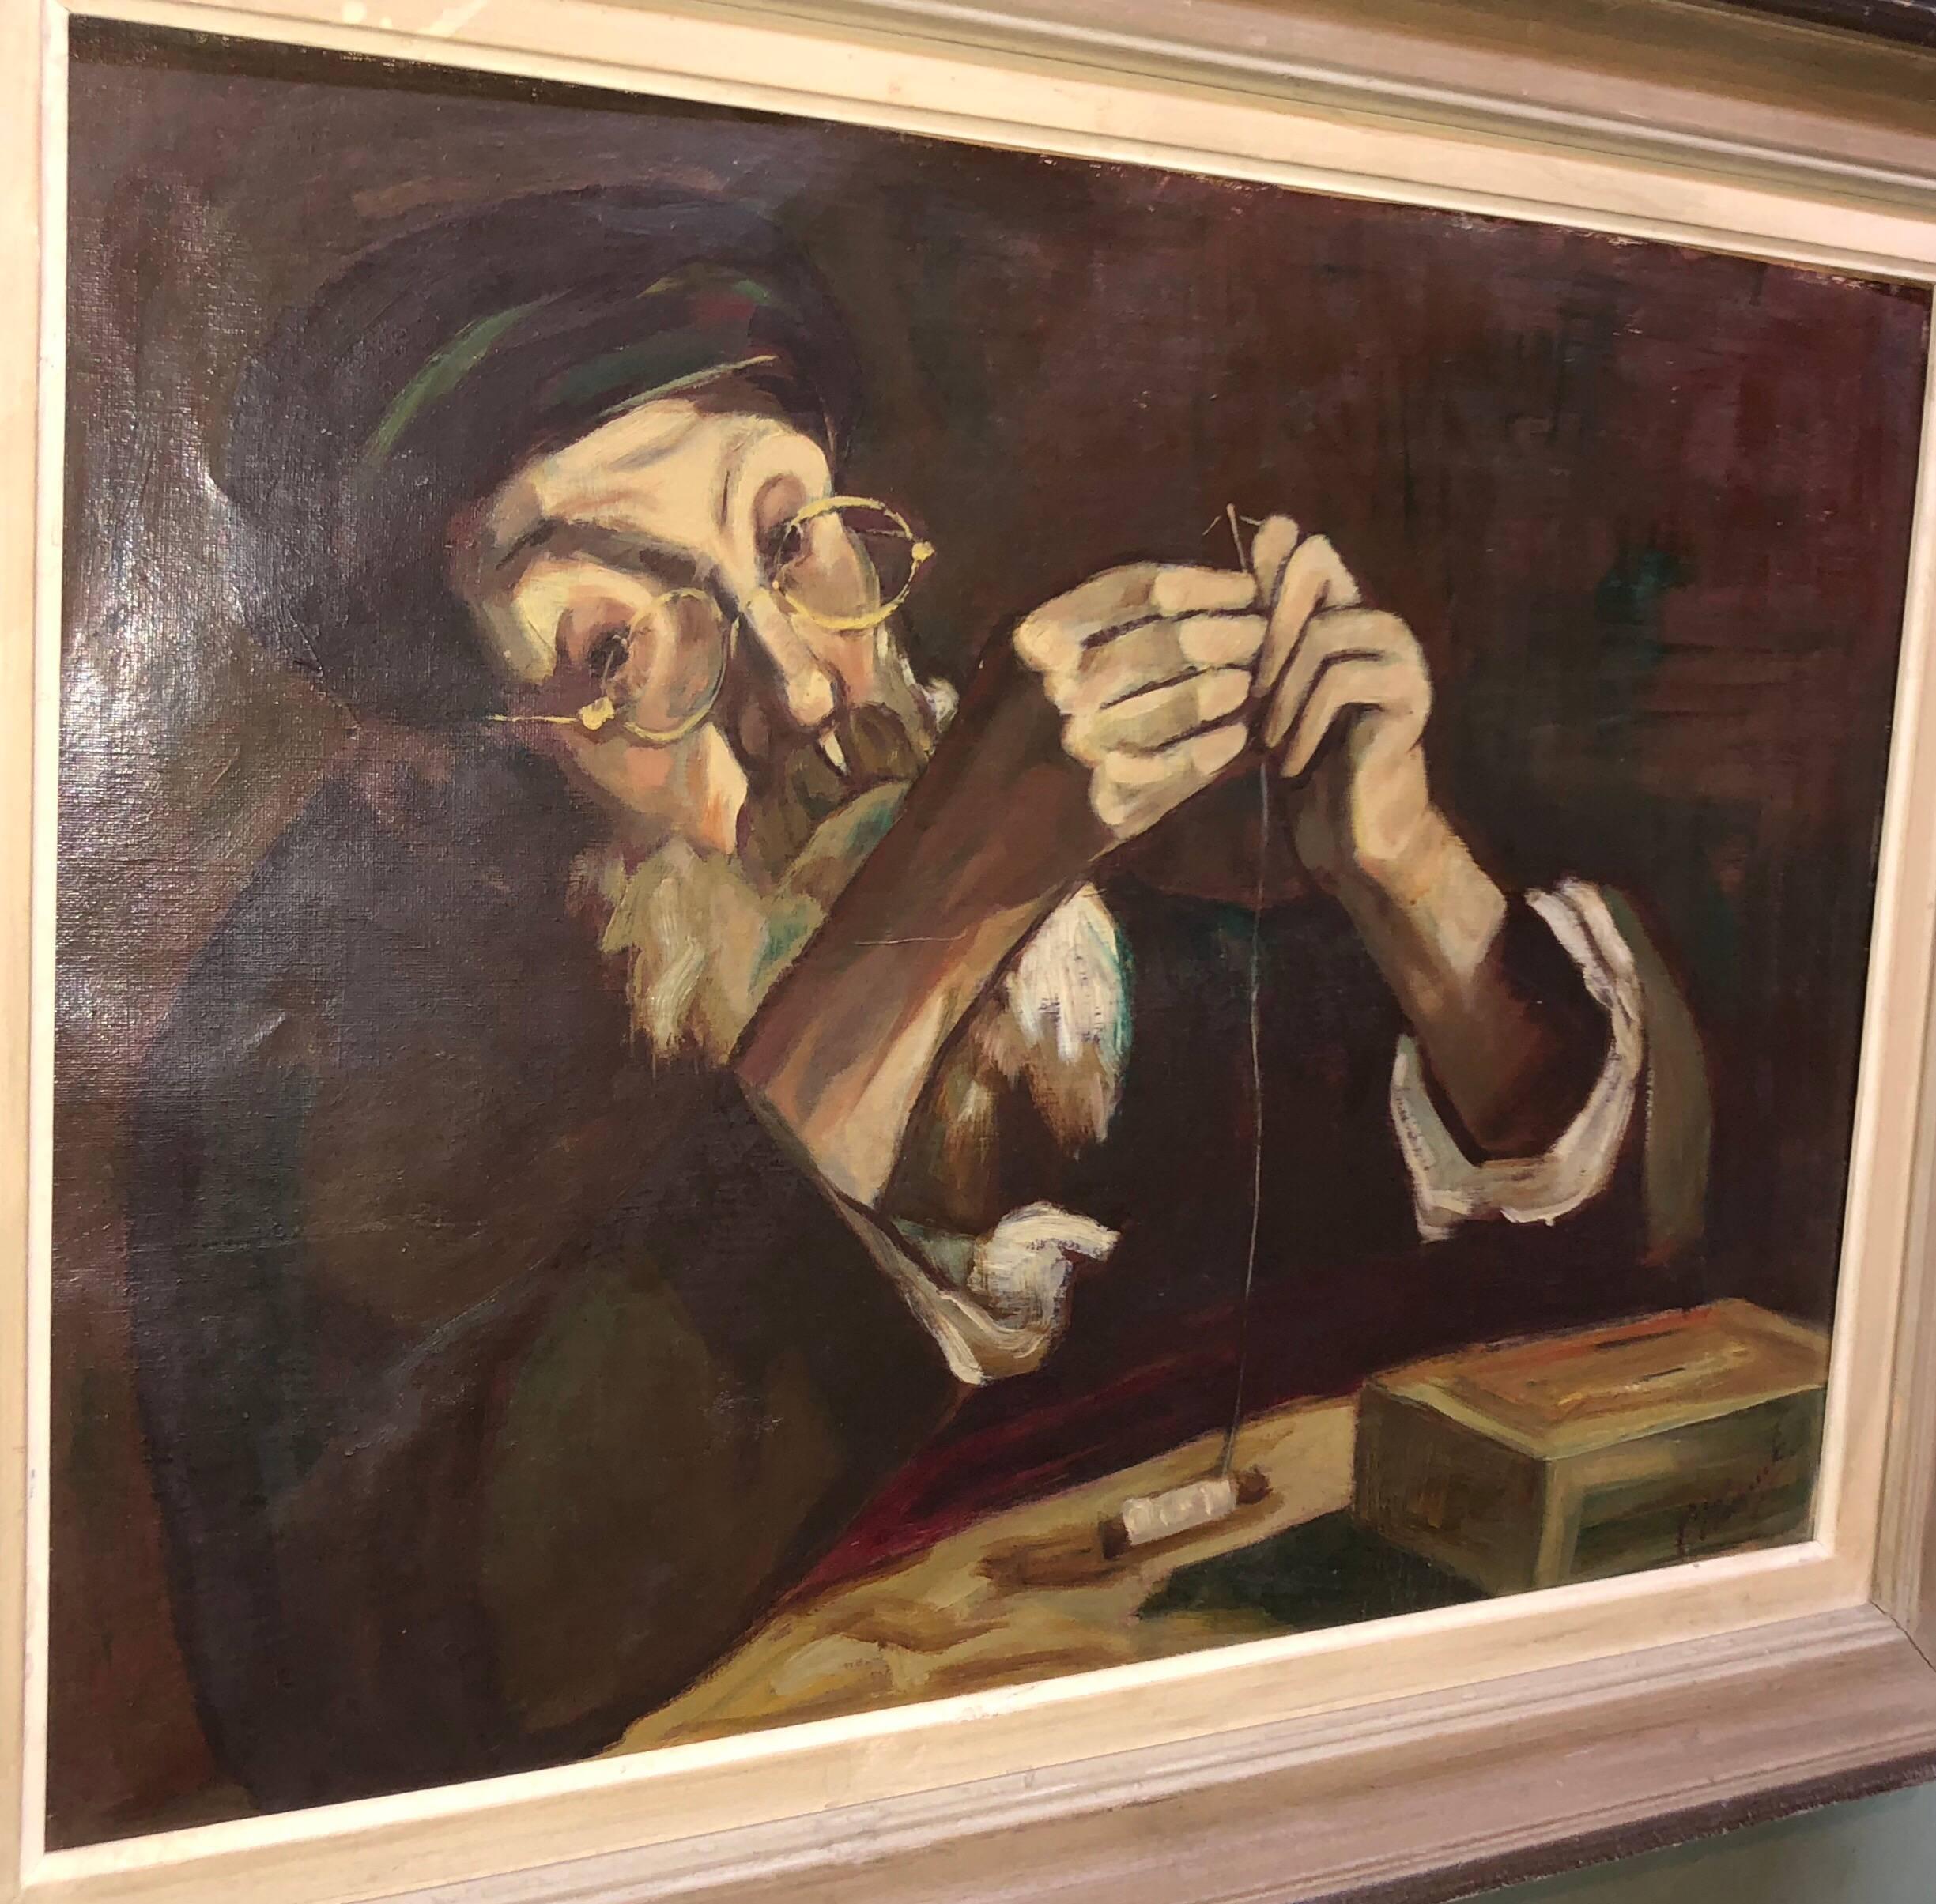 Realistic portrait of an older Jewish shtetl tailor by Polish artist. Here the artist conveys a sense of quiet grandeur through the eyes of his subject and the way it's rendered. Part of a distinguished European lineage of Jewish genre artists who